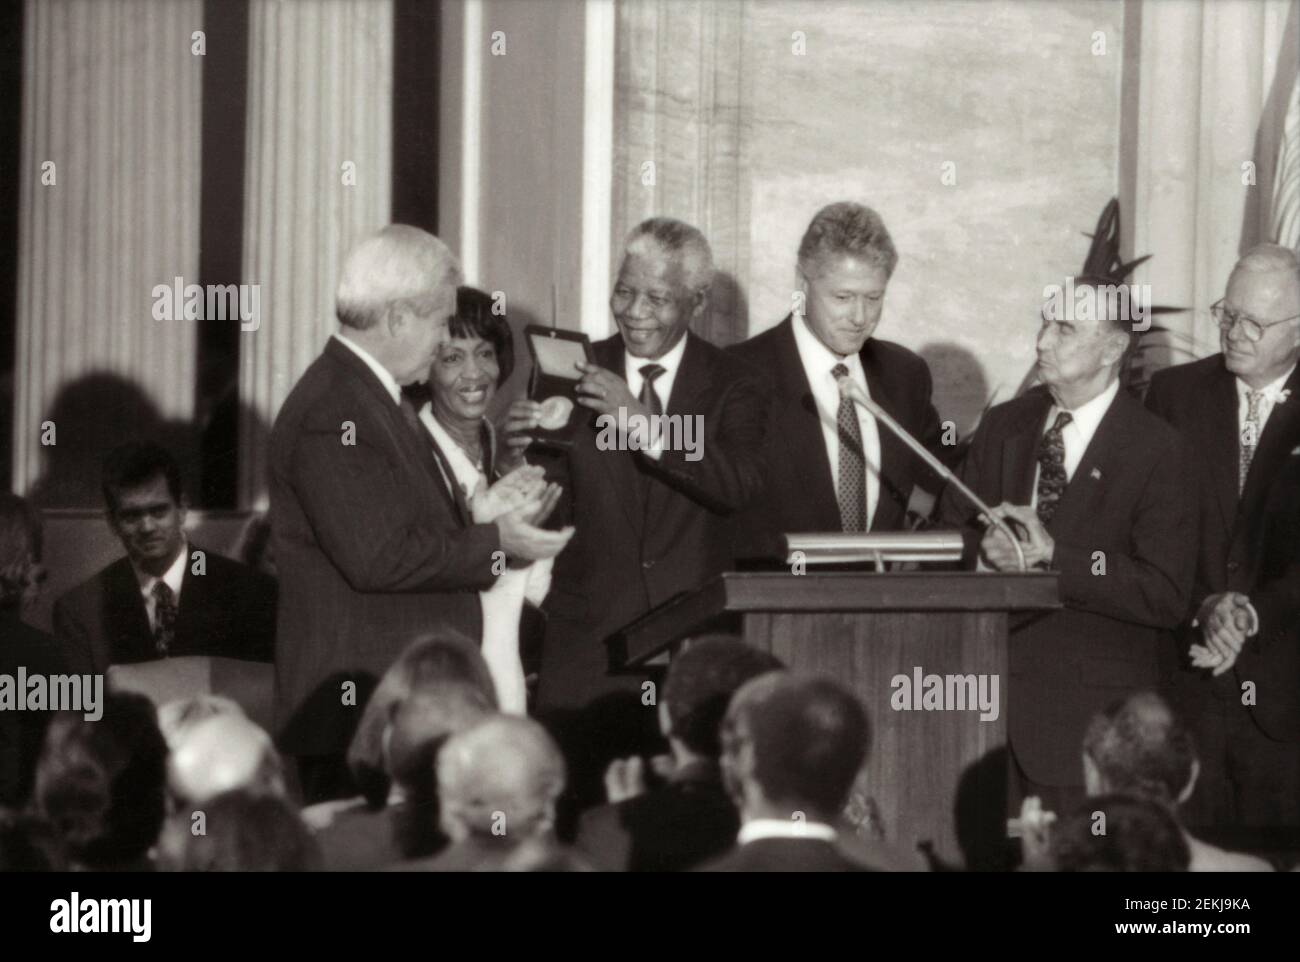 Nelson Mandela receiving Congressional Gold Medal from U.S. President Clinton, as Speaker of the House Newt Gingrich, Senator Strom Thurmond, Congresswoman Maxine Waters and others look on, Washington, D.C., USA, Rebecca Roth, September 23, 1998 Stock Photo